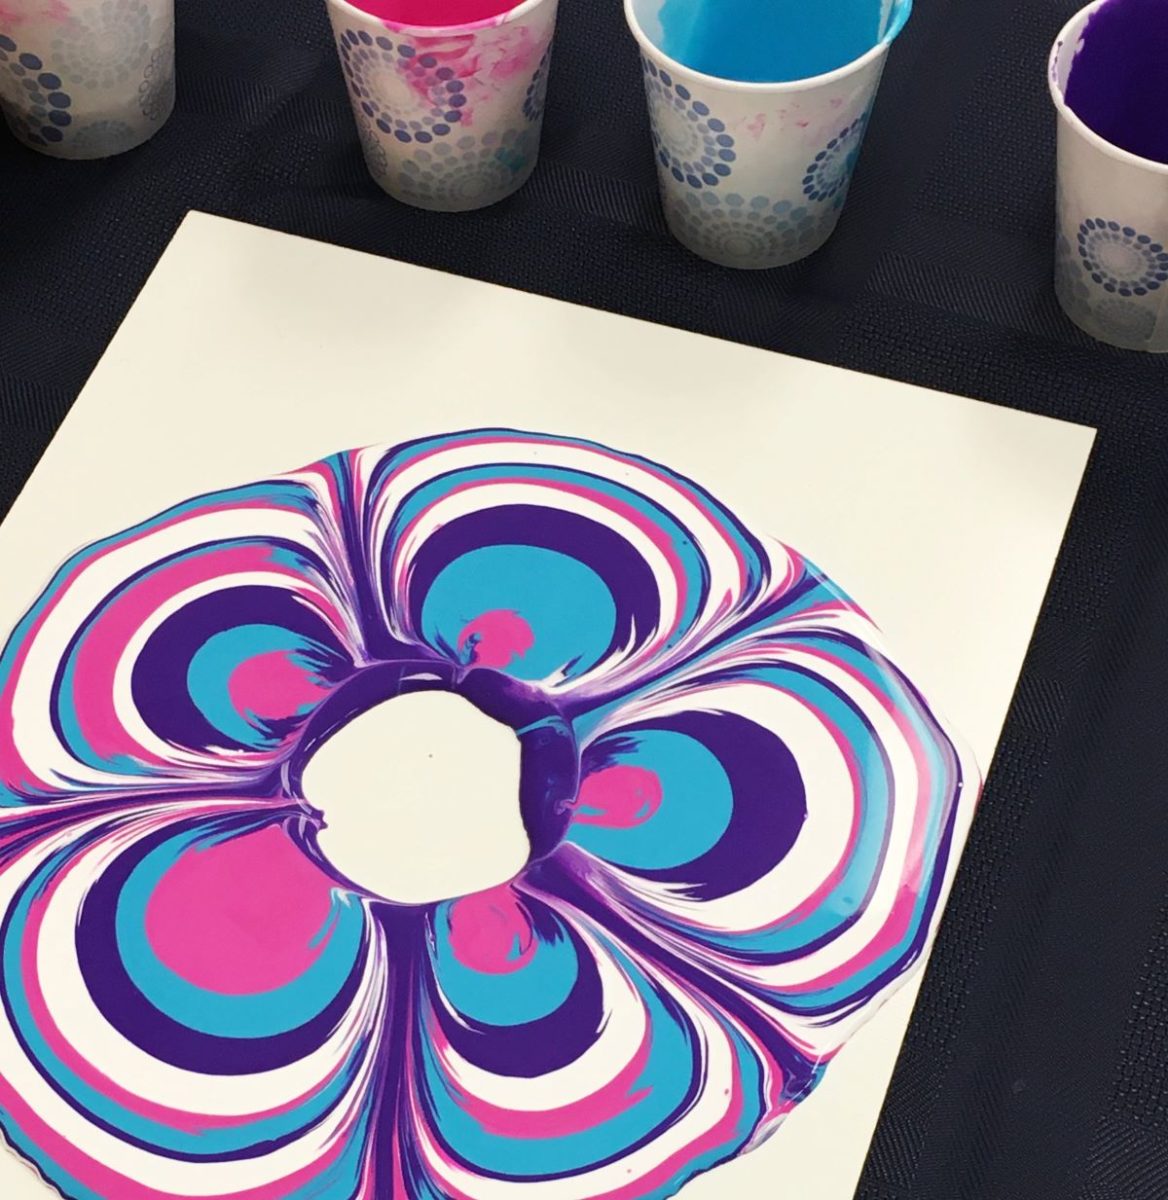 Acrylic paint-pouring activity with pink, blue and white marbled effect